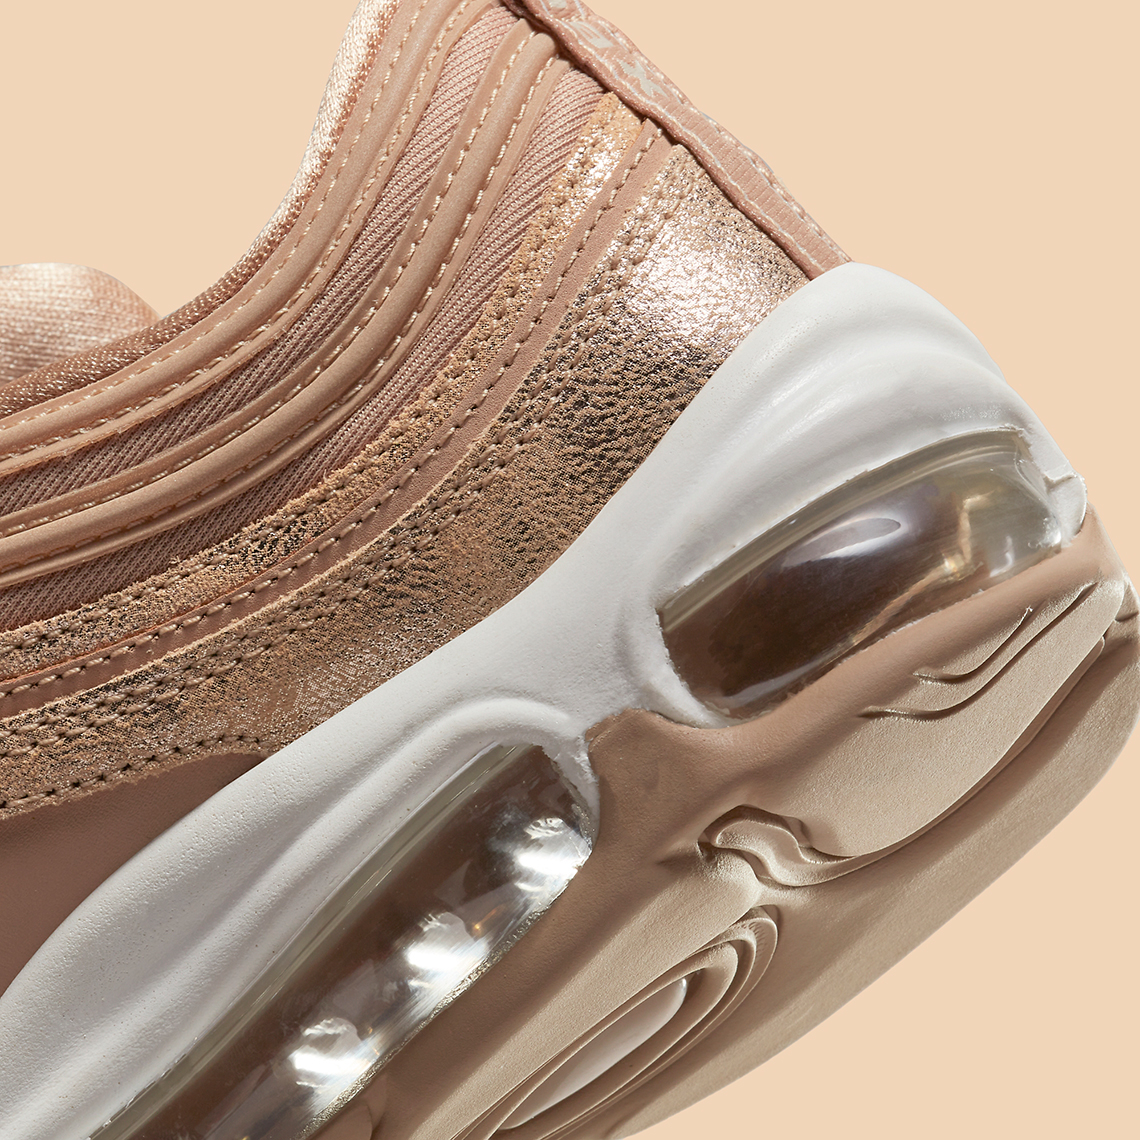 Provisional Whose horizon Nike Air Max 97 Distressed Tan Release Date - Golf Single Player